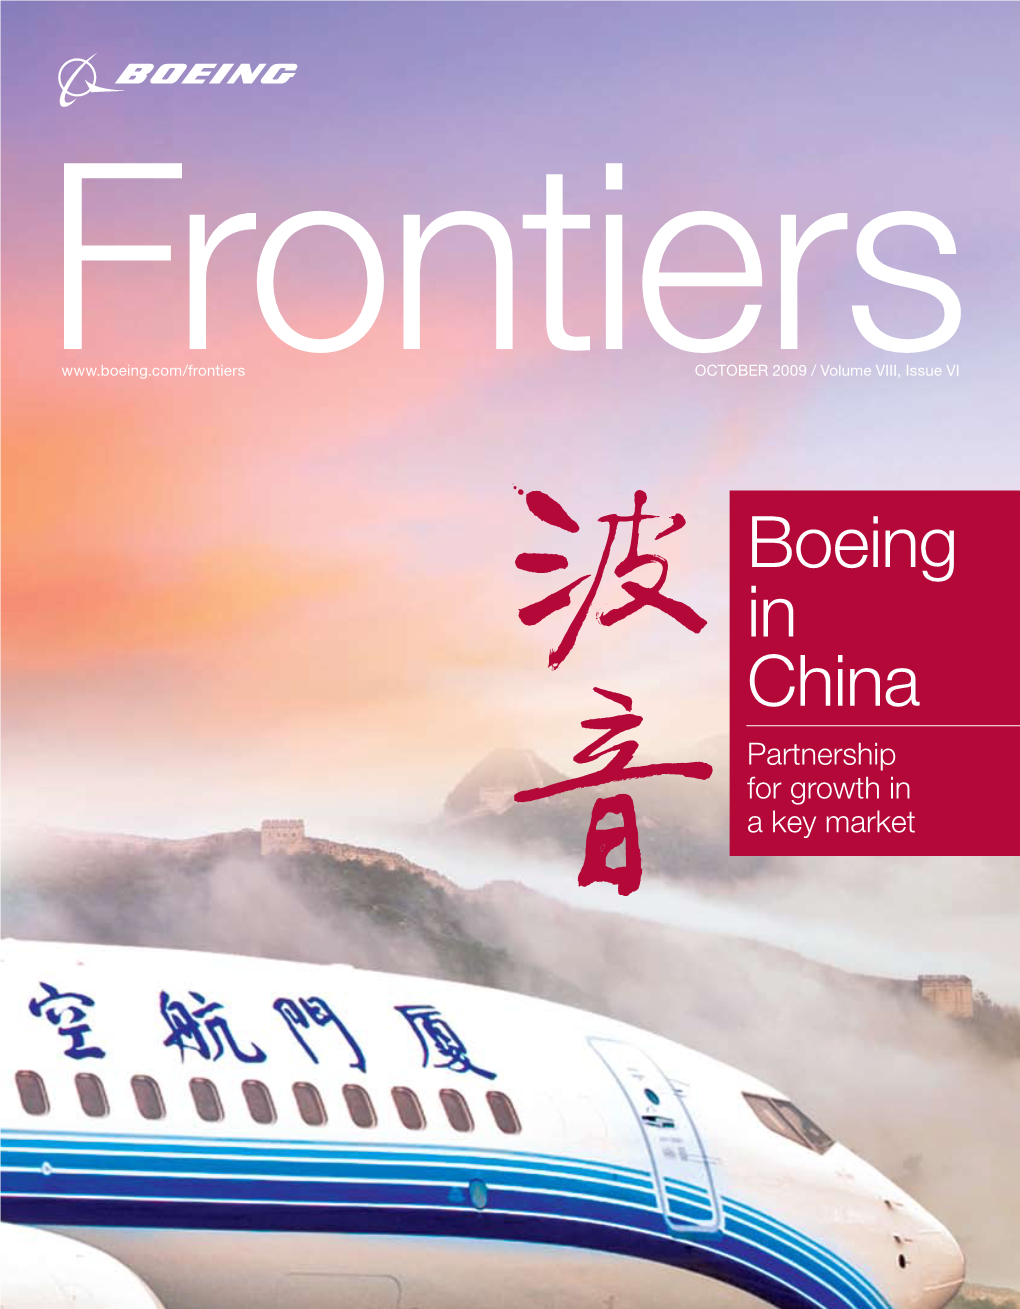 Boeing in China Partnership for Growth in a Key Market